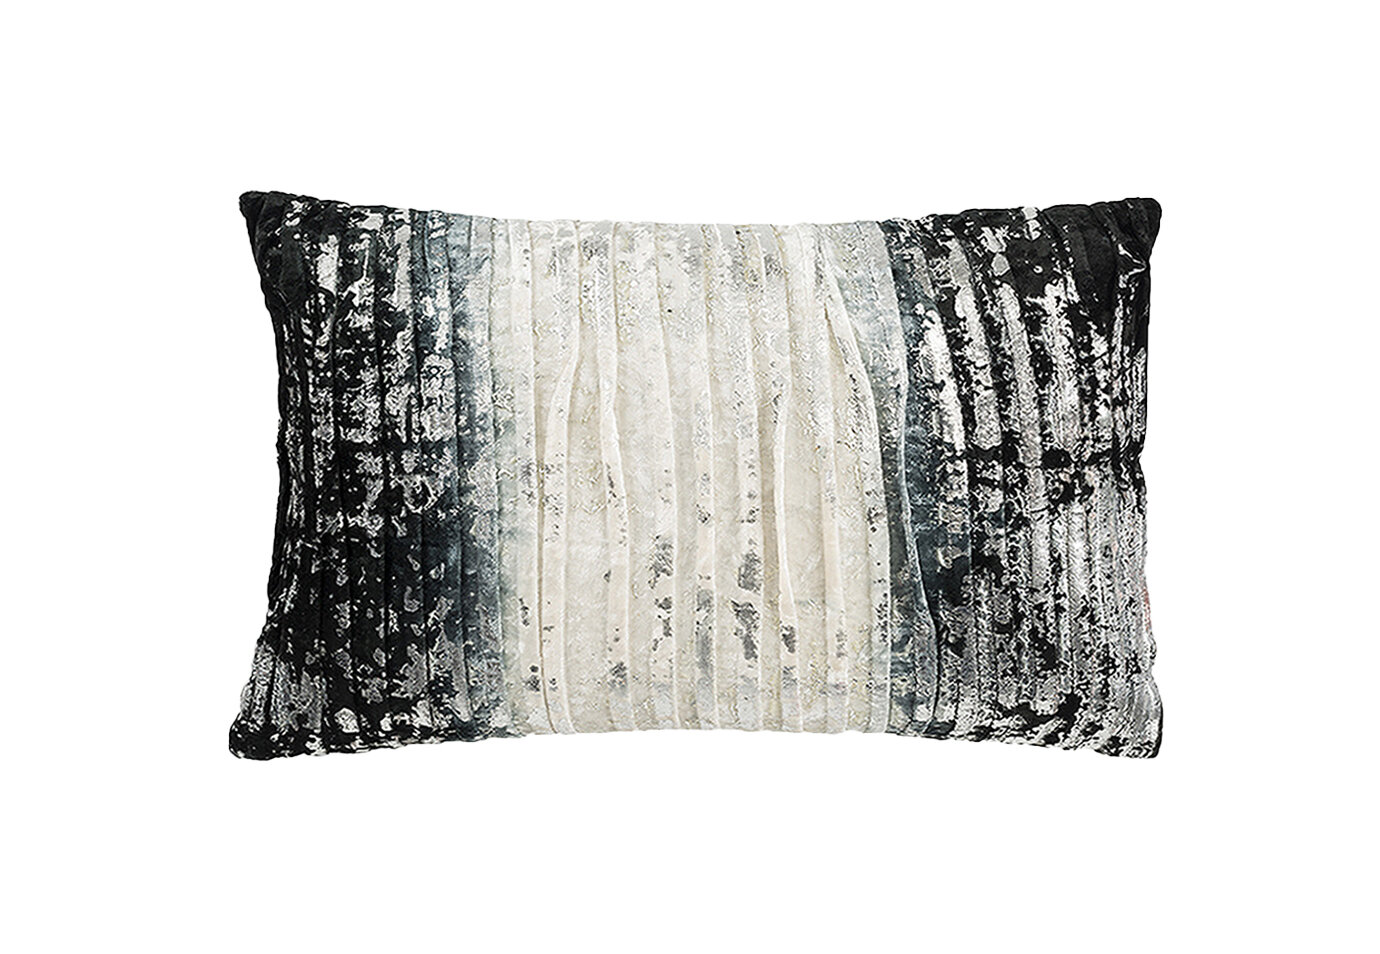 Nahuala Large Lumbar Pillow — TRAVEL PATTERNS | Eclectically curated goods  from around the world.